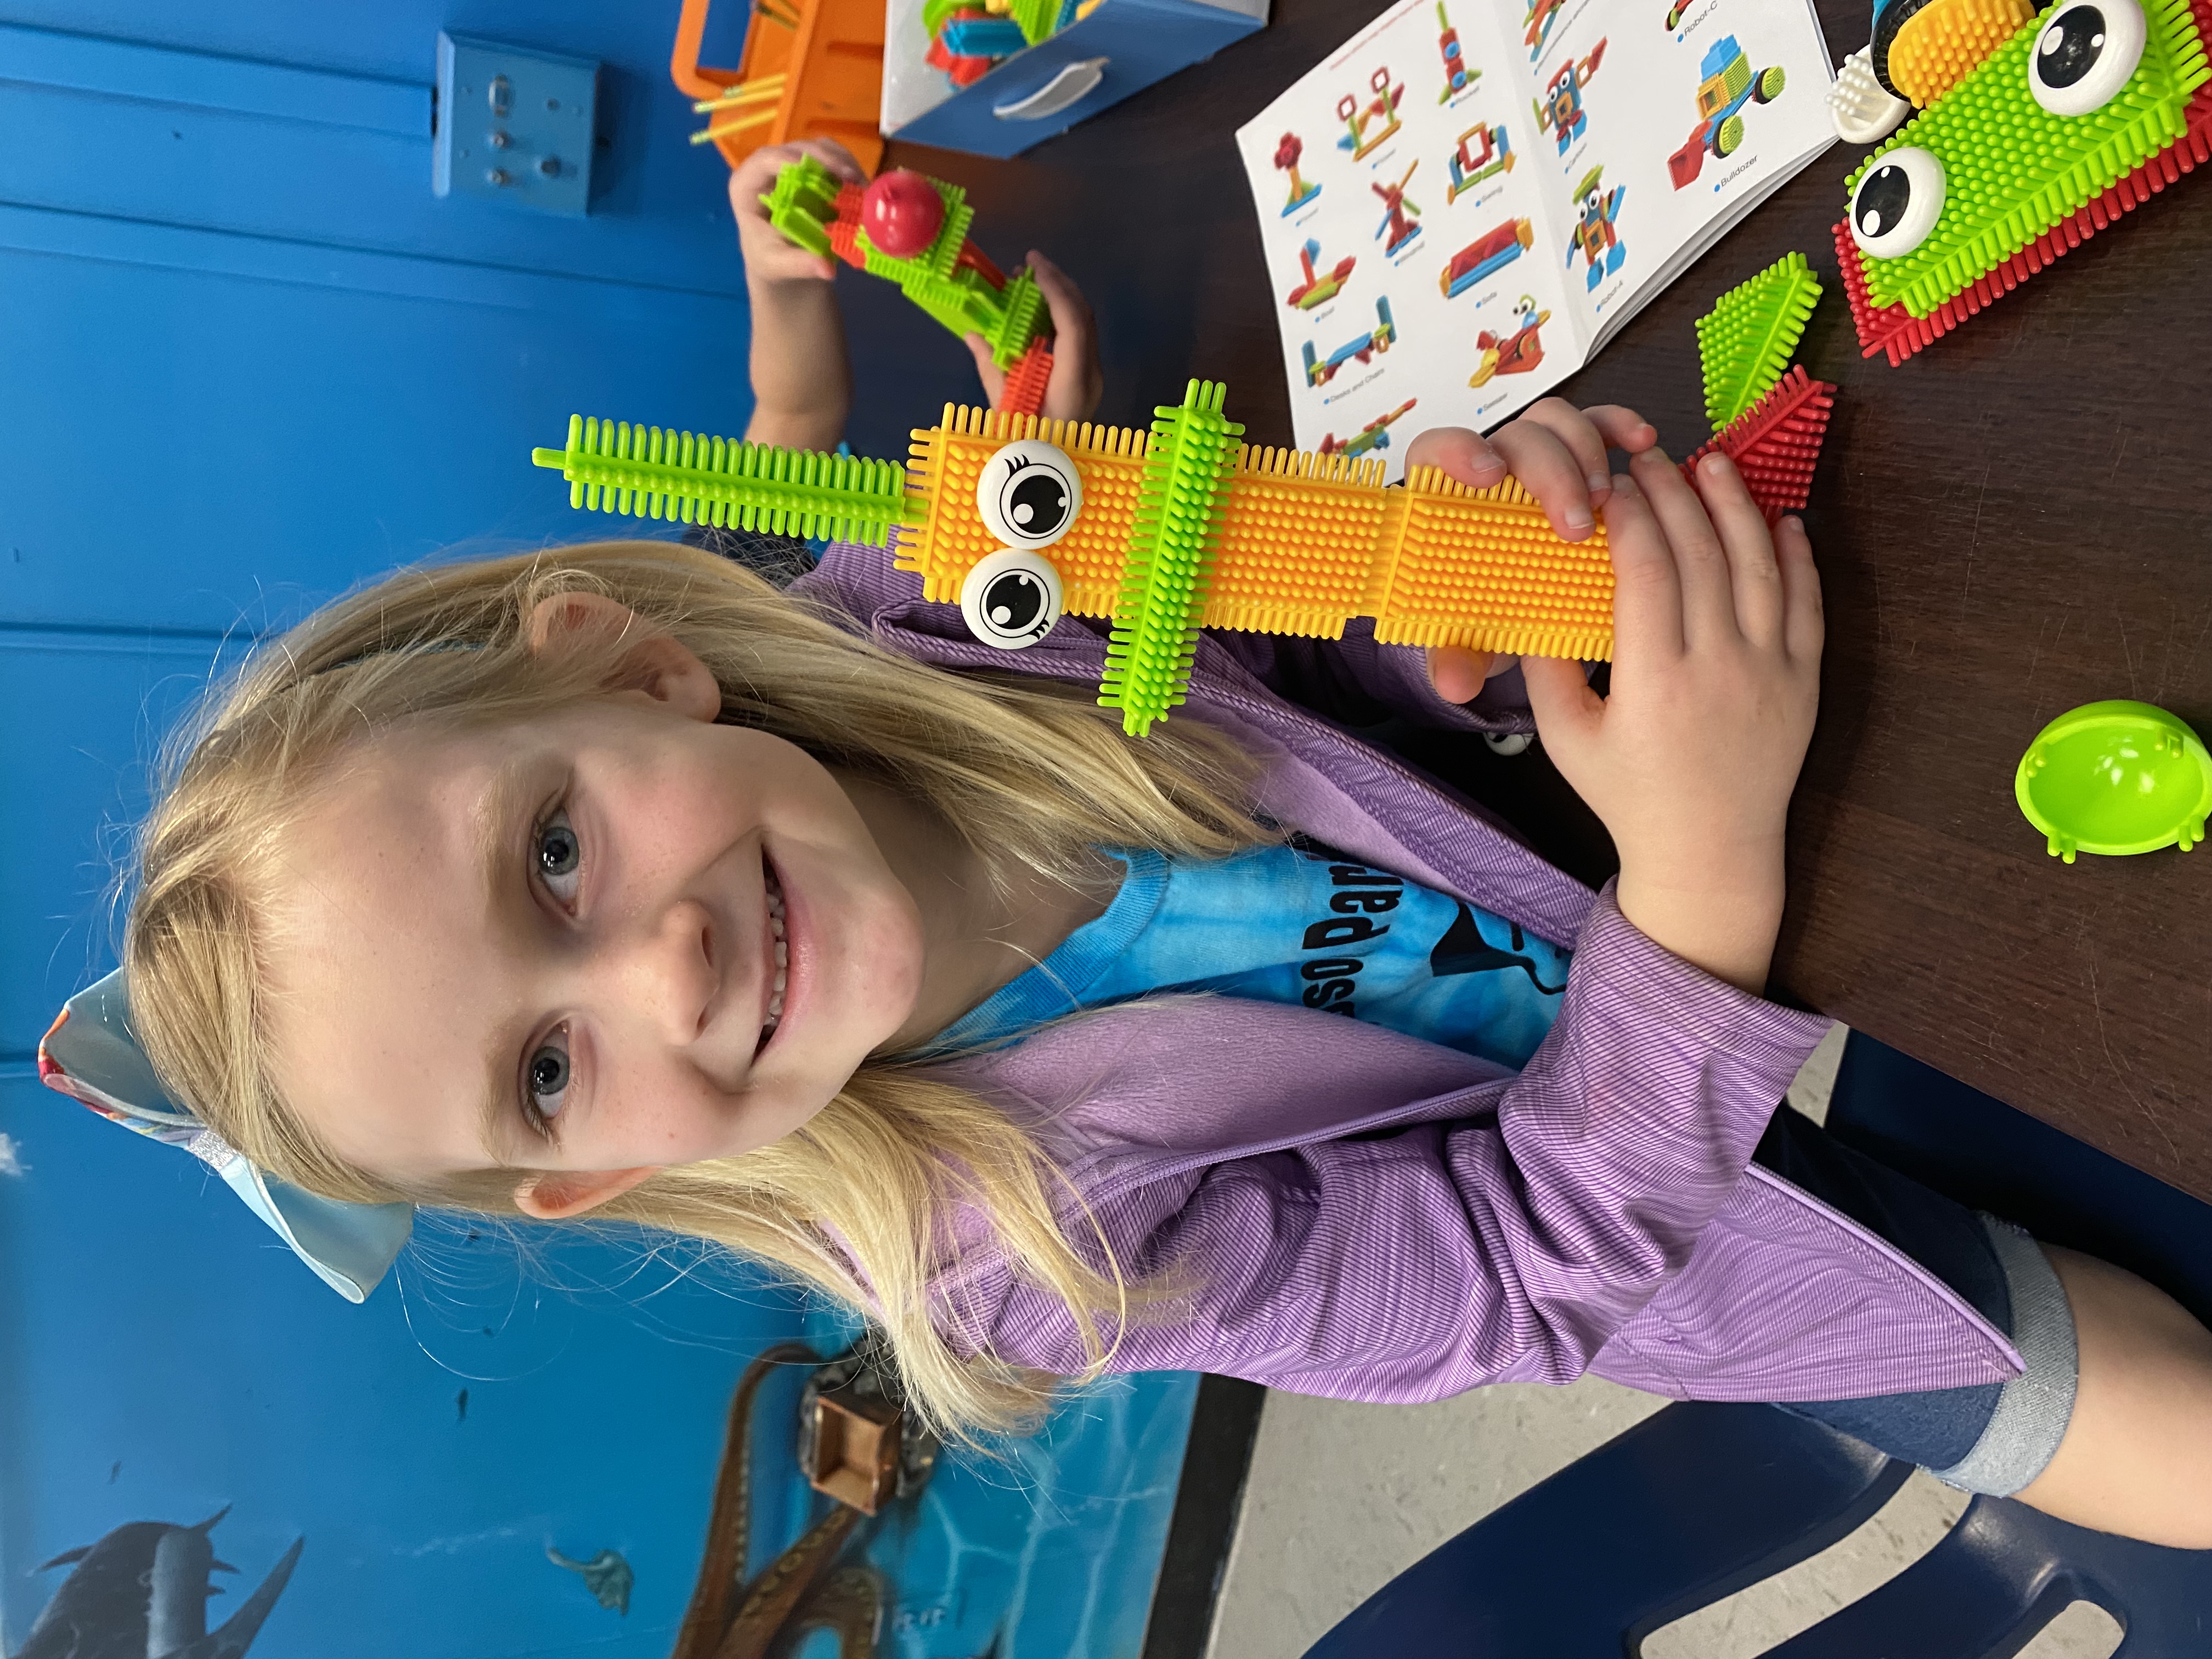 Kindergarten students exploring how to be an engineer with Bristle toys.